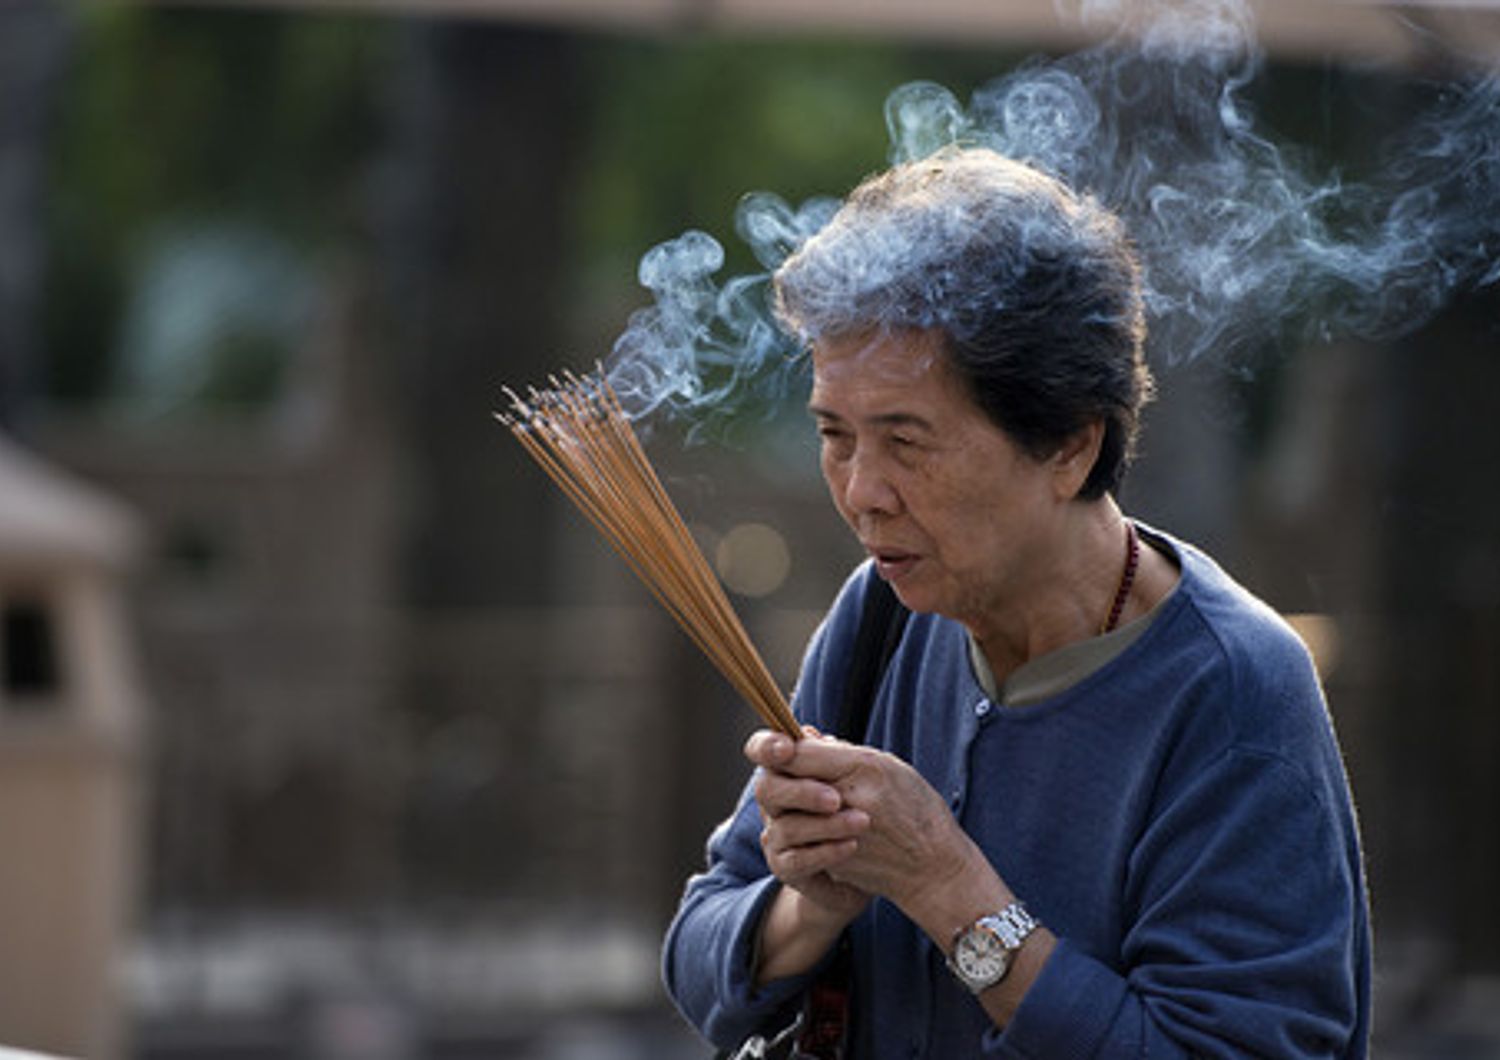 A woman prays holding incense sticks at the Wong Tai Sin temple in Hong Kong on October 28, 2013. The Taoist temple is a major tourist attraction and centre for worship in Hong Kong, and attracts thousands of visitors each year especially around the Chinese New Year holiday.